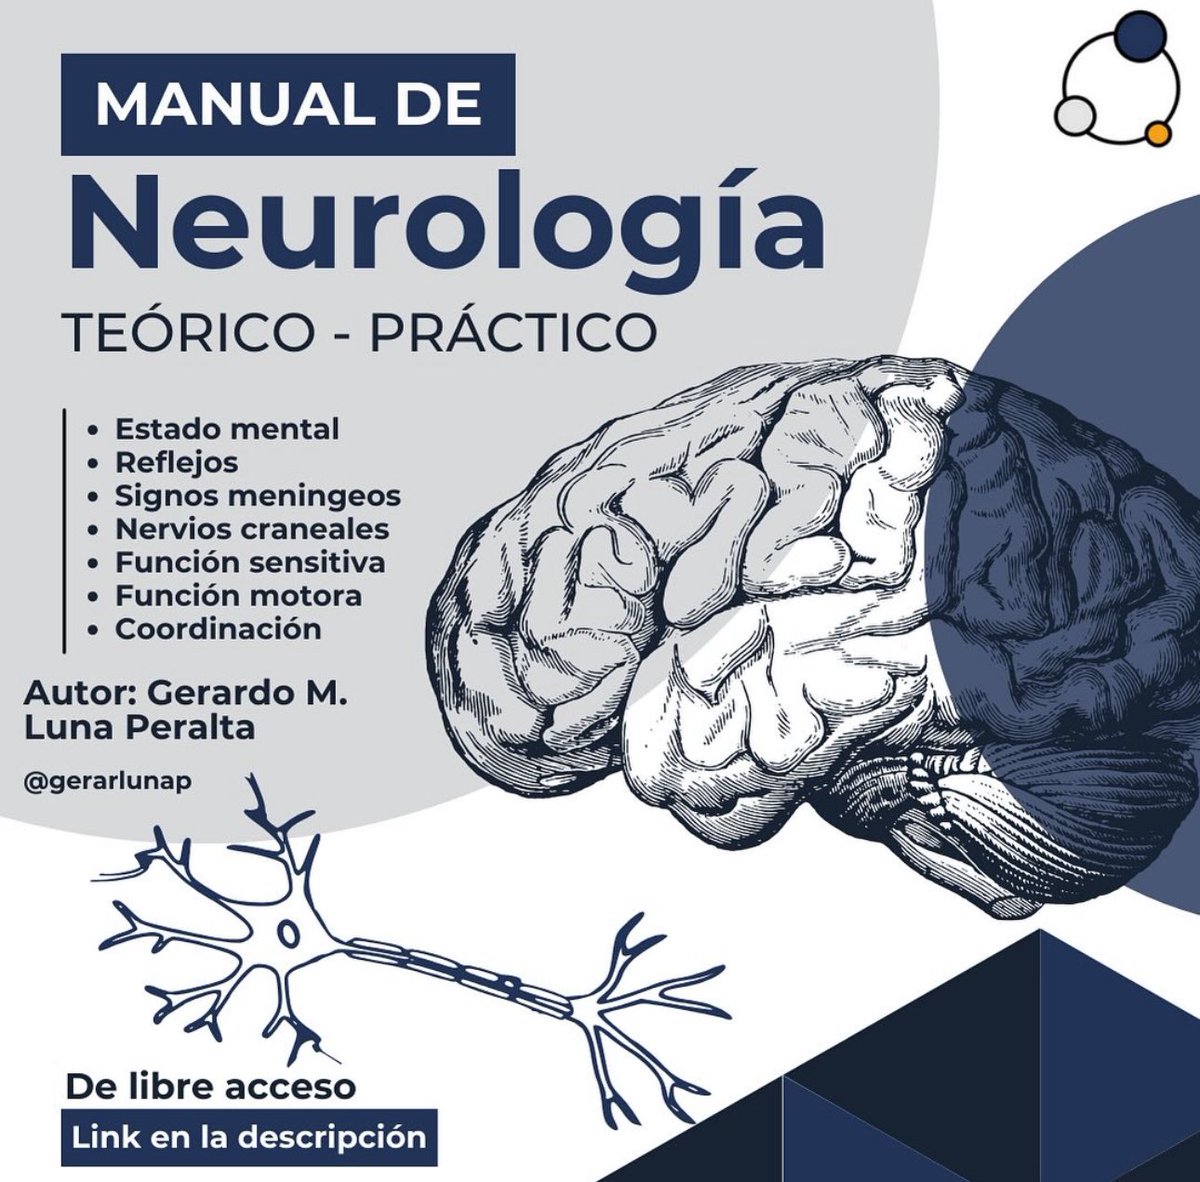 This is my “Manual de Neurología”, a tool that I created 1 year ago to teach how to conduct a neurological exam appropriately at a Semiology course we created at la Ayudantía de Fisiopatología y Semiologia from UNMSM, Perú. It is in Spanish and it is free access.